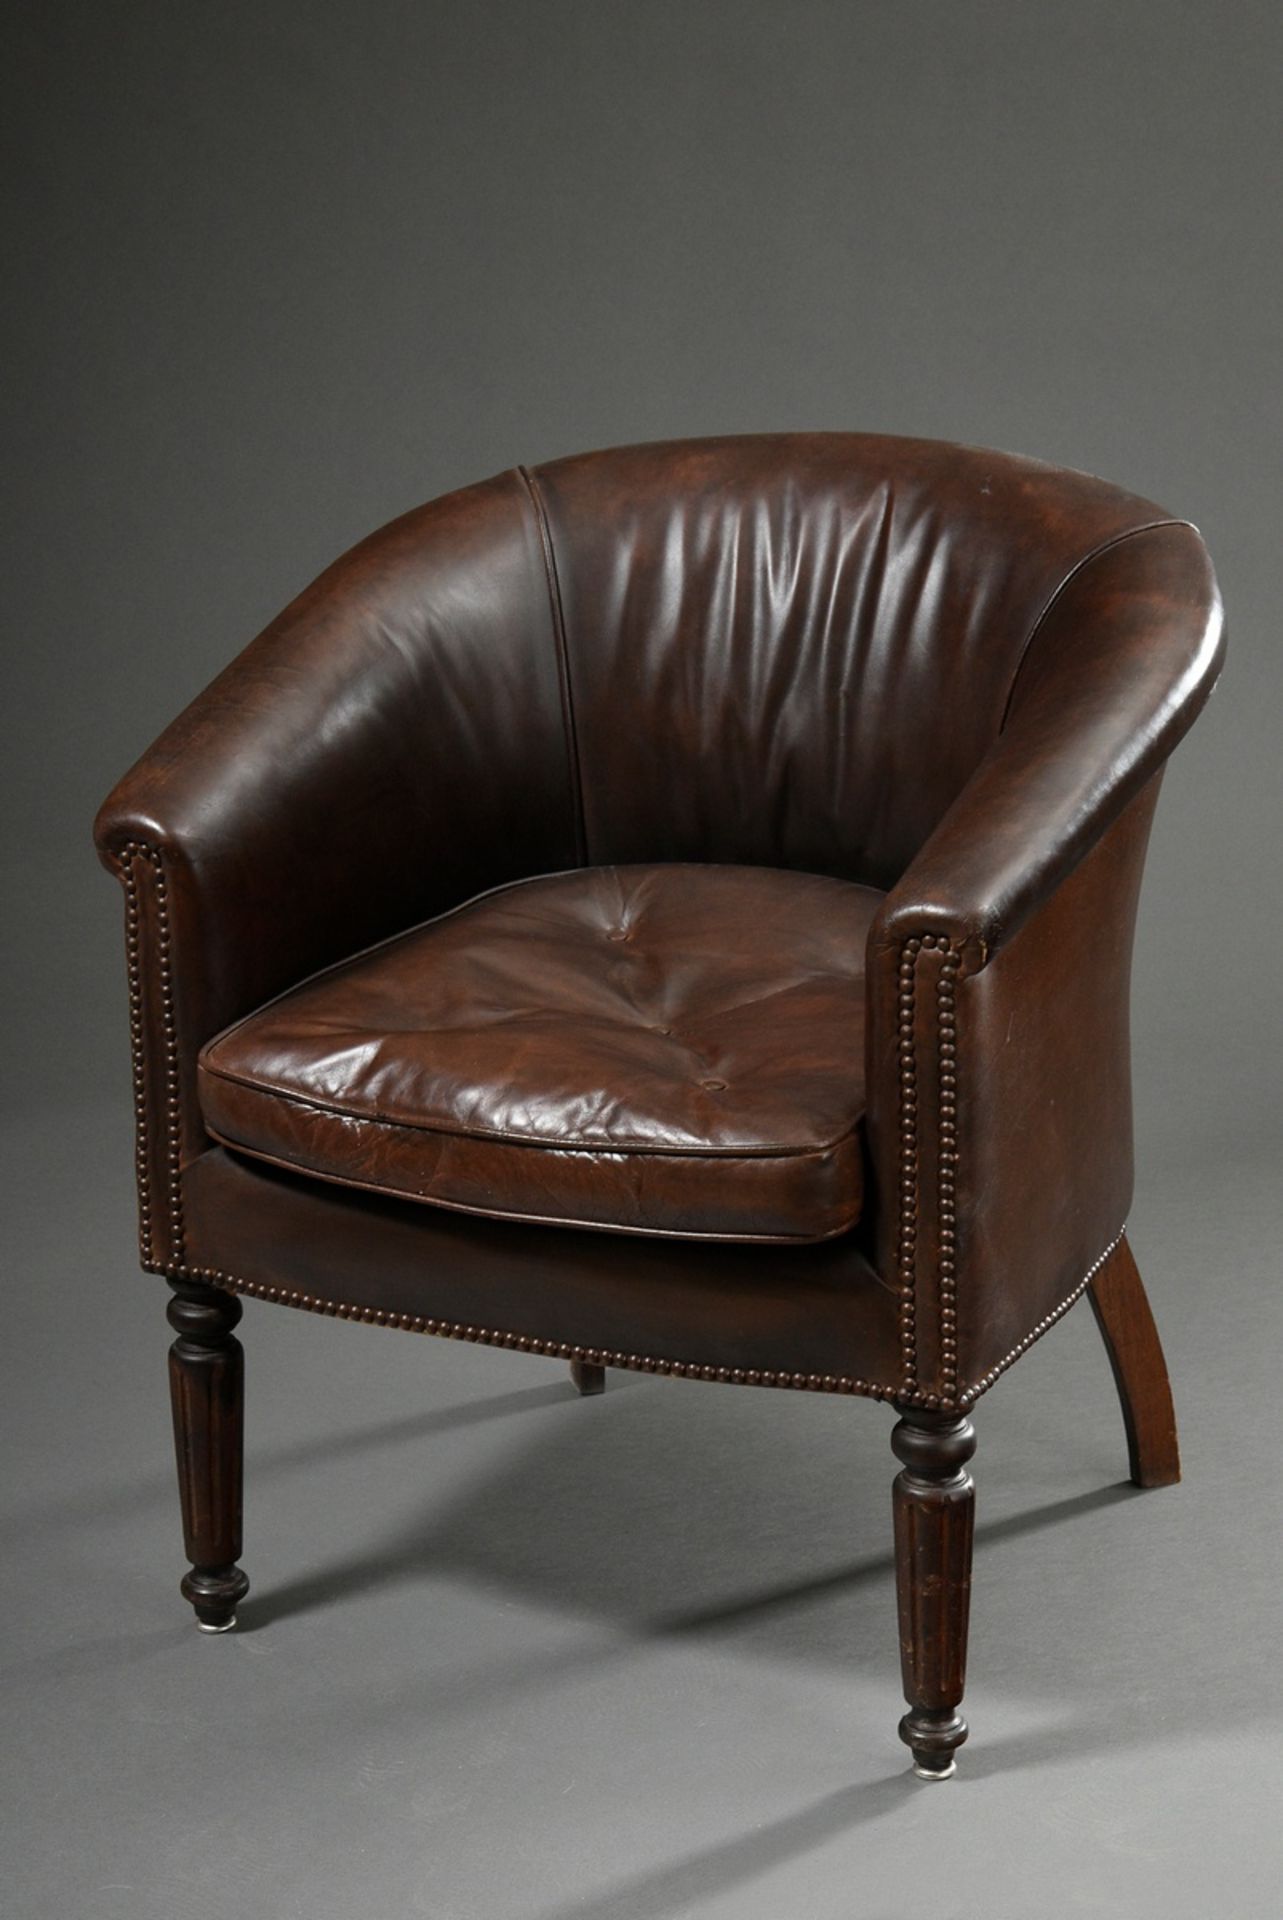 Dark brown leather club armchair with semi-circular backrest and fluted front legs, removable cushi